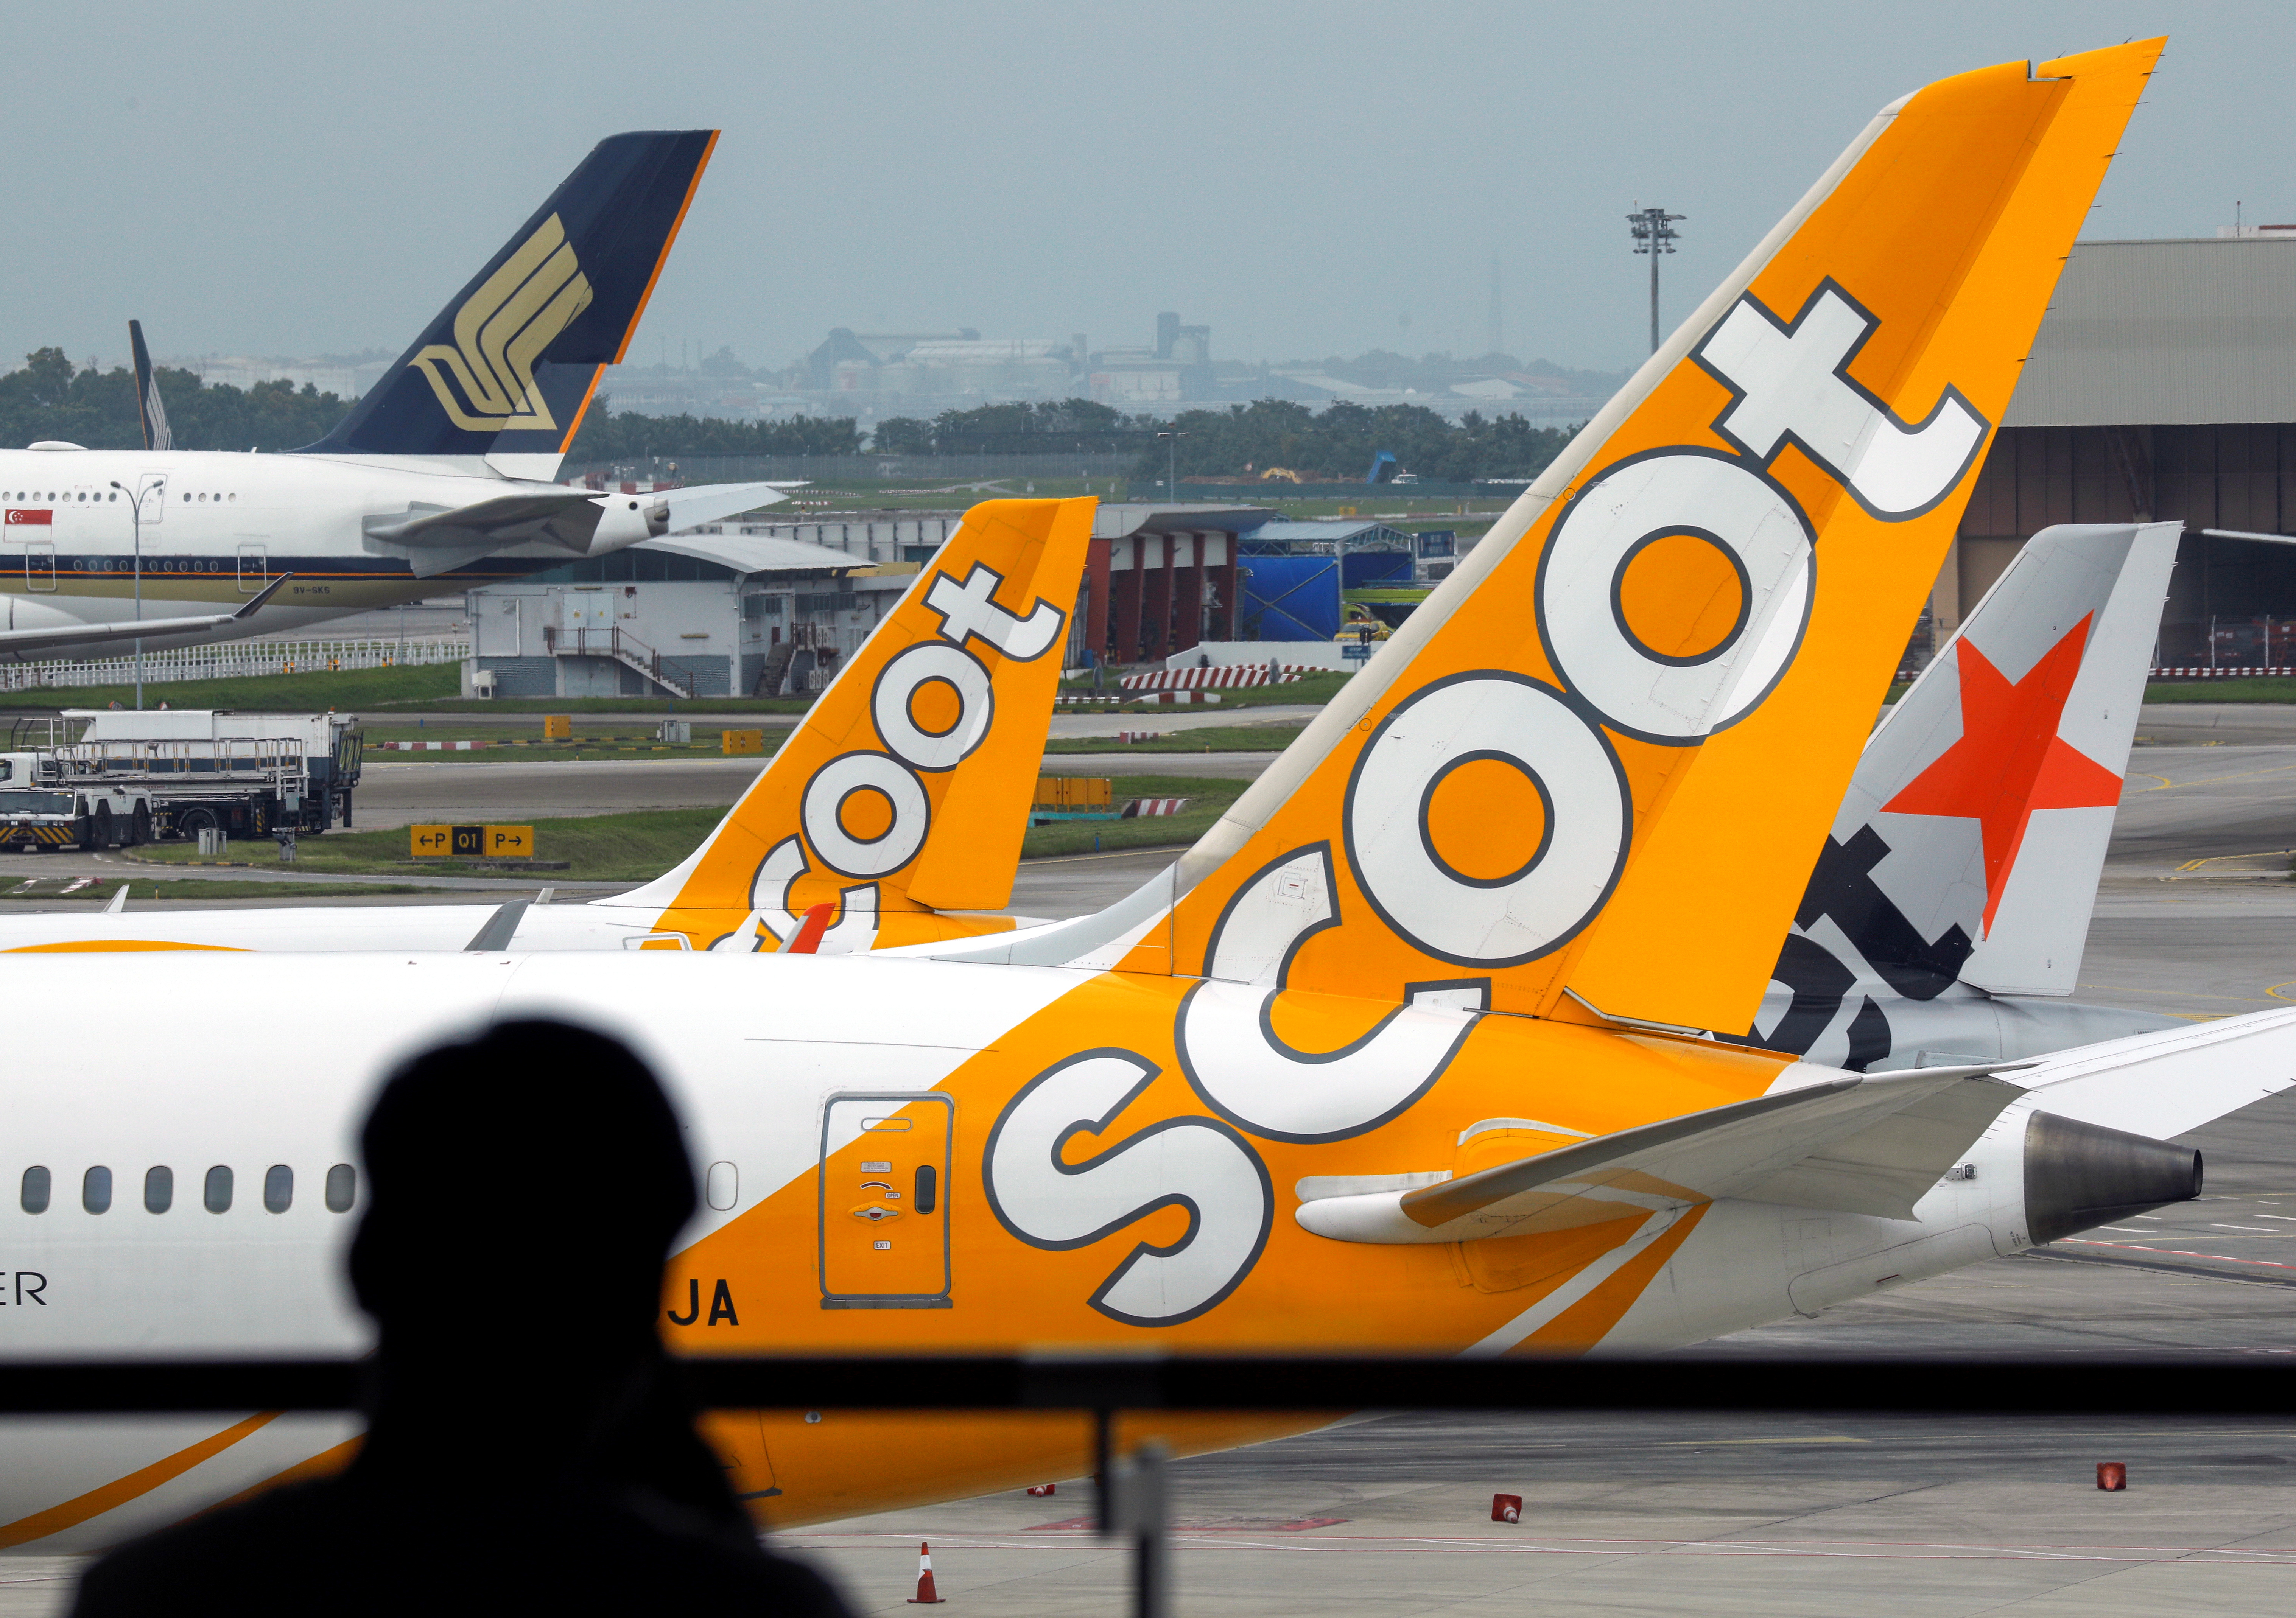 Scoot, Jetstar and Singapore Airlines planes sit on the tarmac at Singapore's Changi Airport